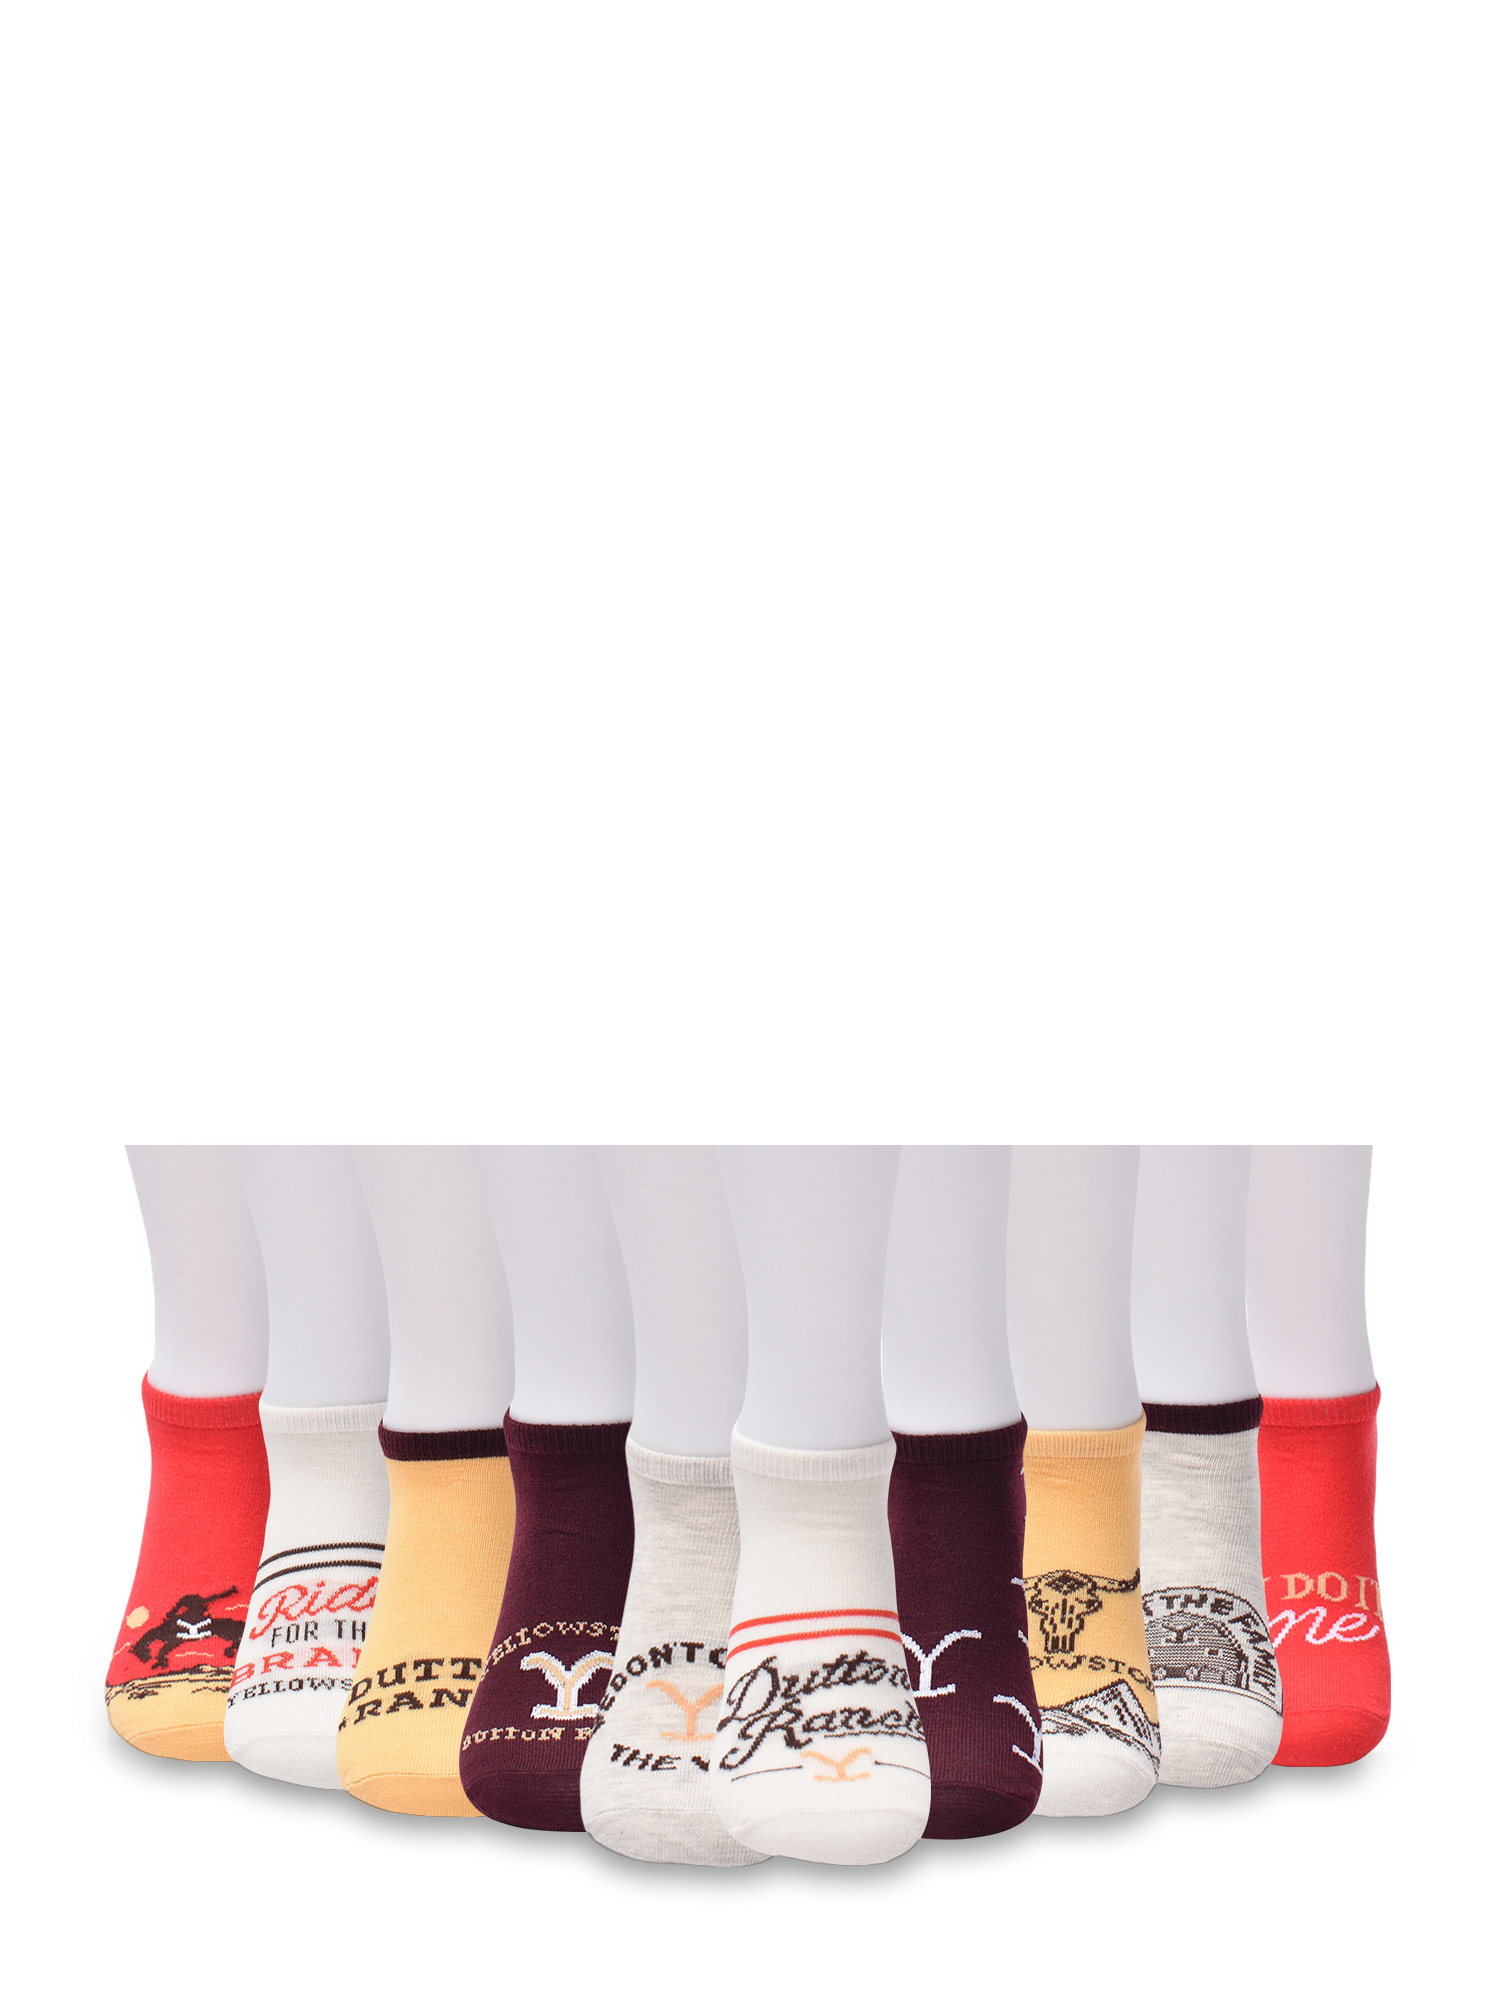 Yellowstone Womens Graphic Super No Show Socks, 10-Pack, Sizes 4-10 - image 4 of 5